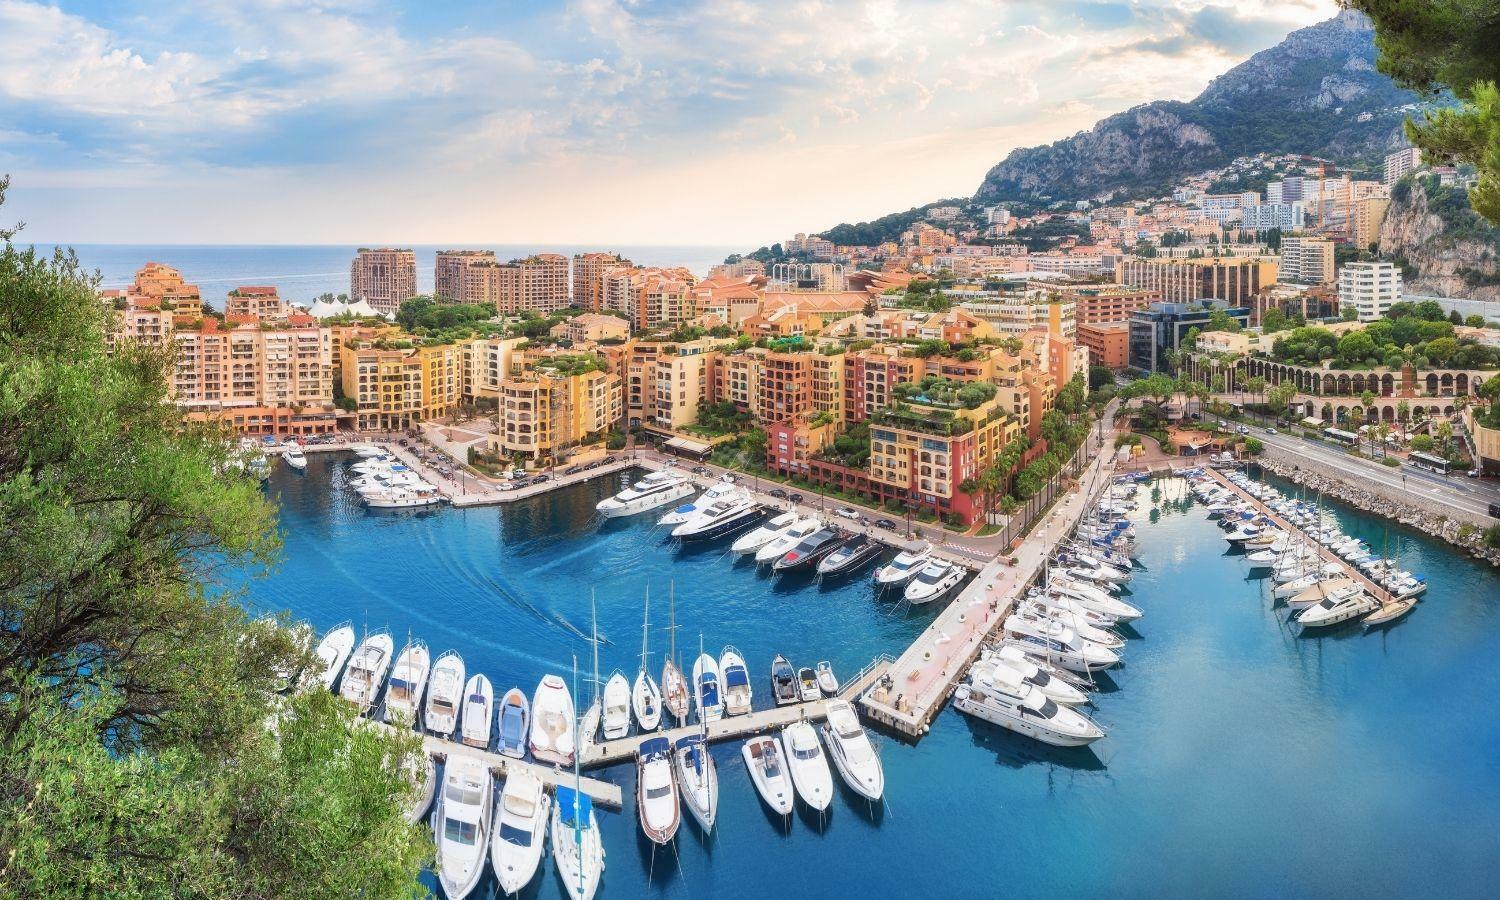 Sailing Yacht Charter from Monaco-Ville for 3 days| Signature Sailing Charter